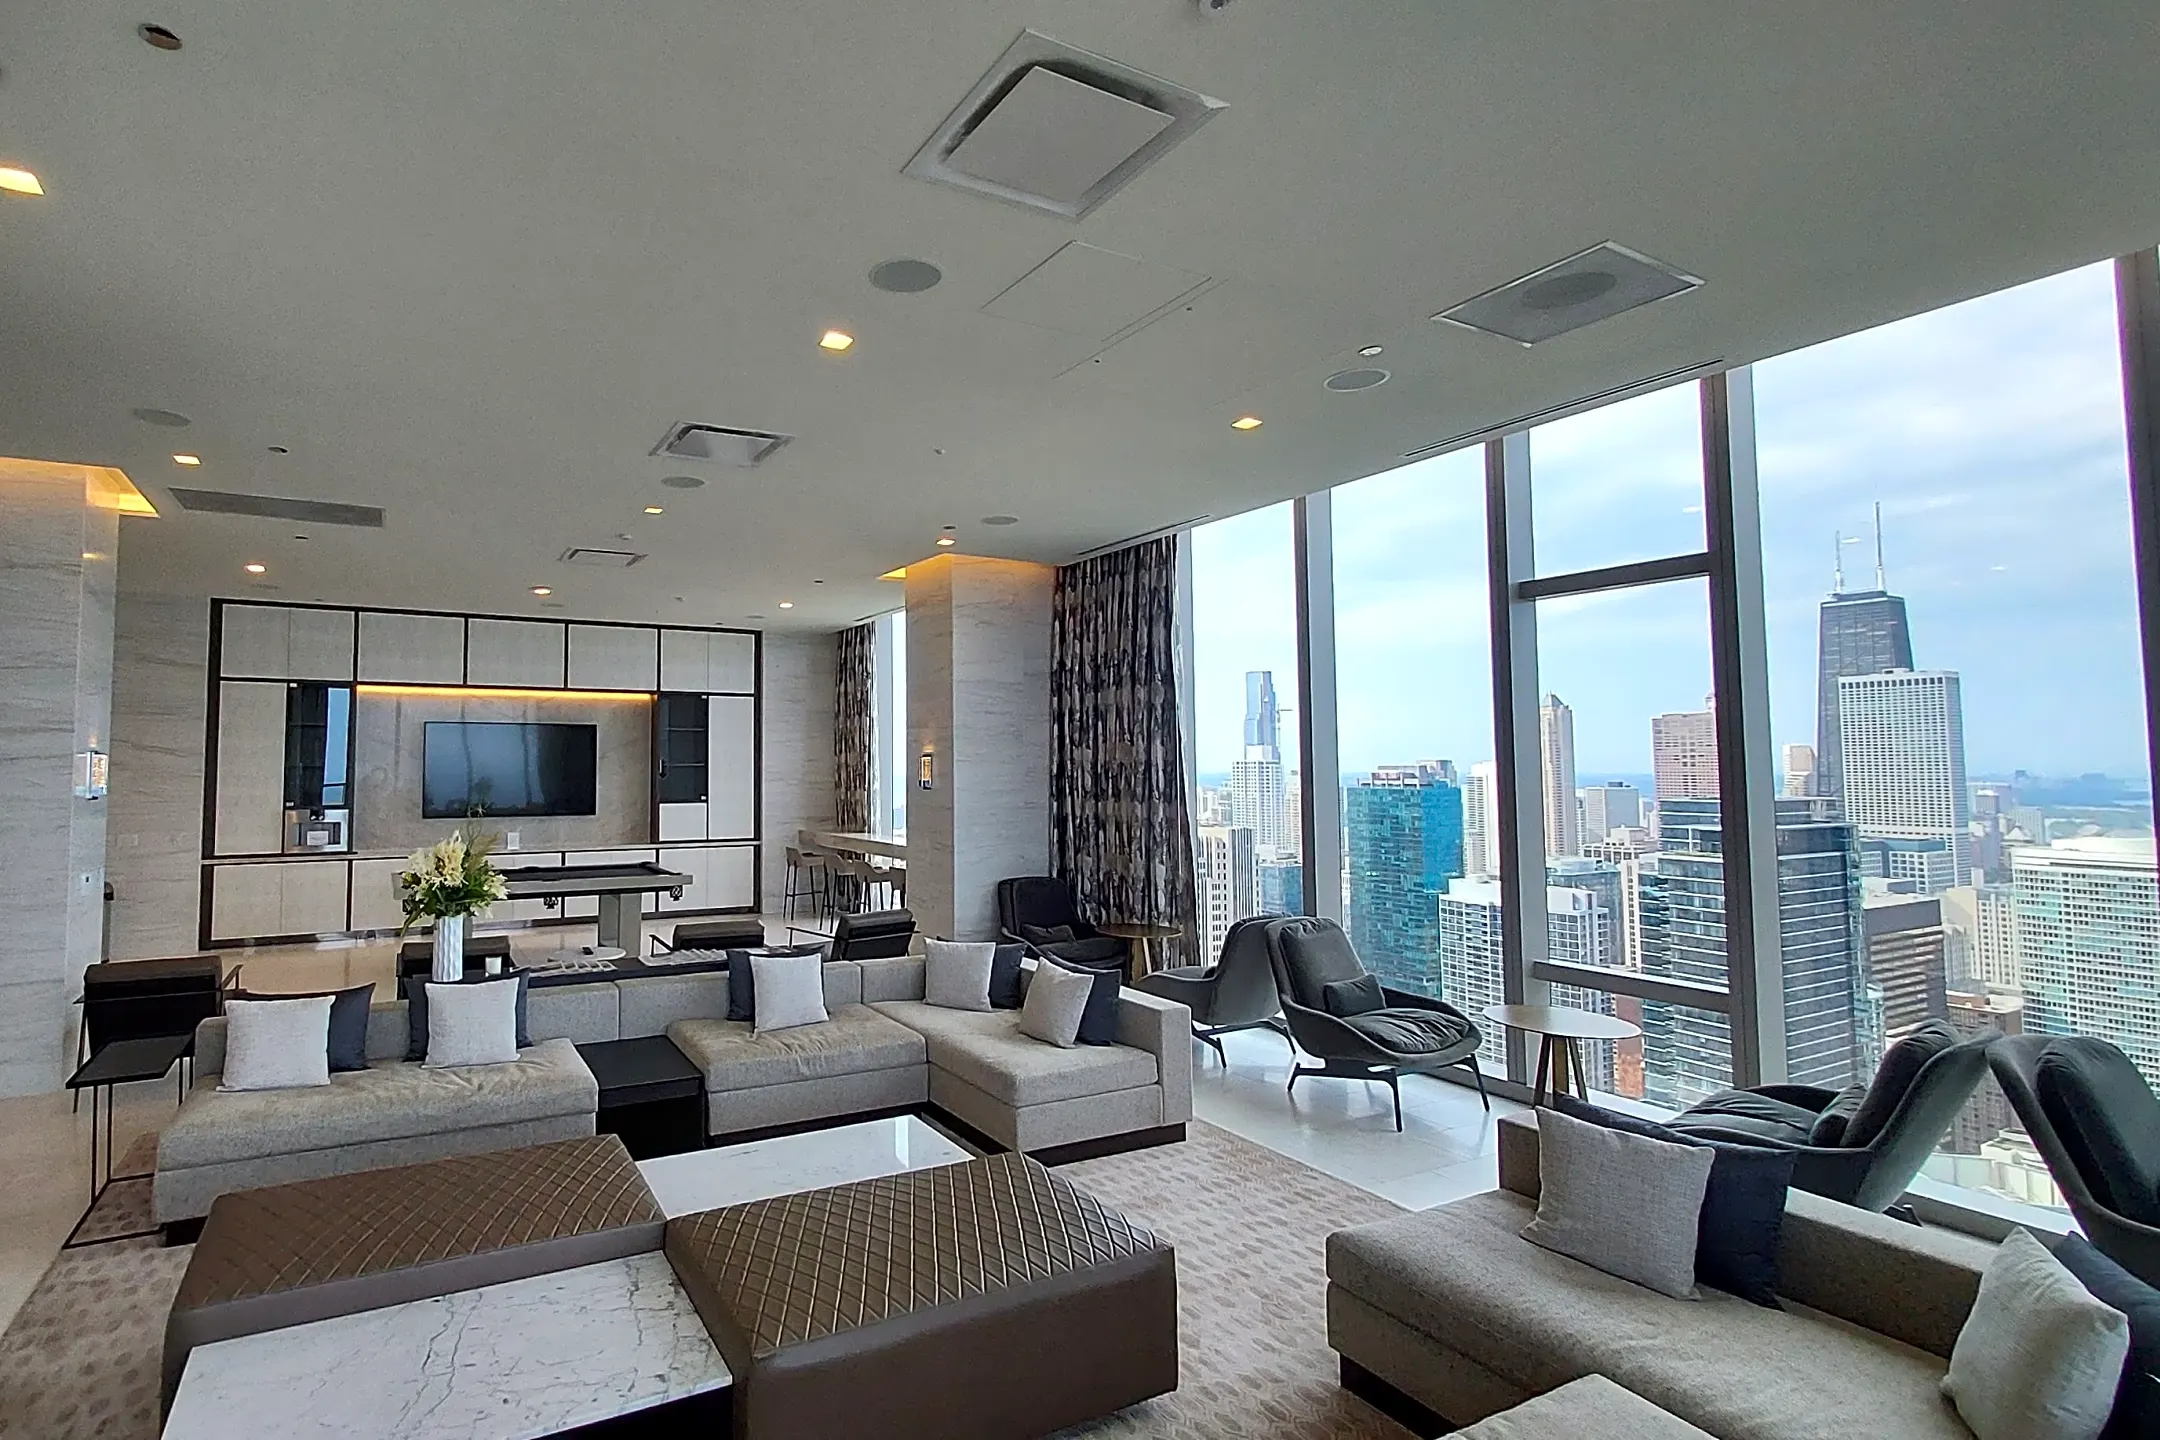 Living Room - 363 East Wacker Drive - Chicago, IL